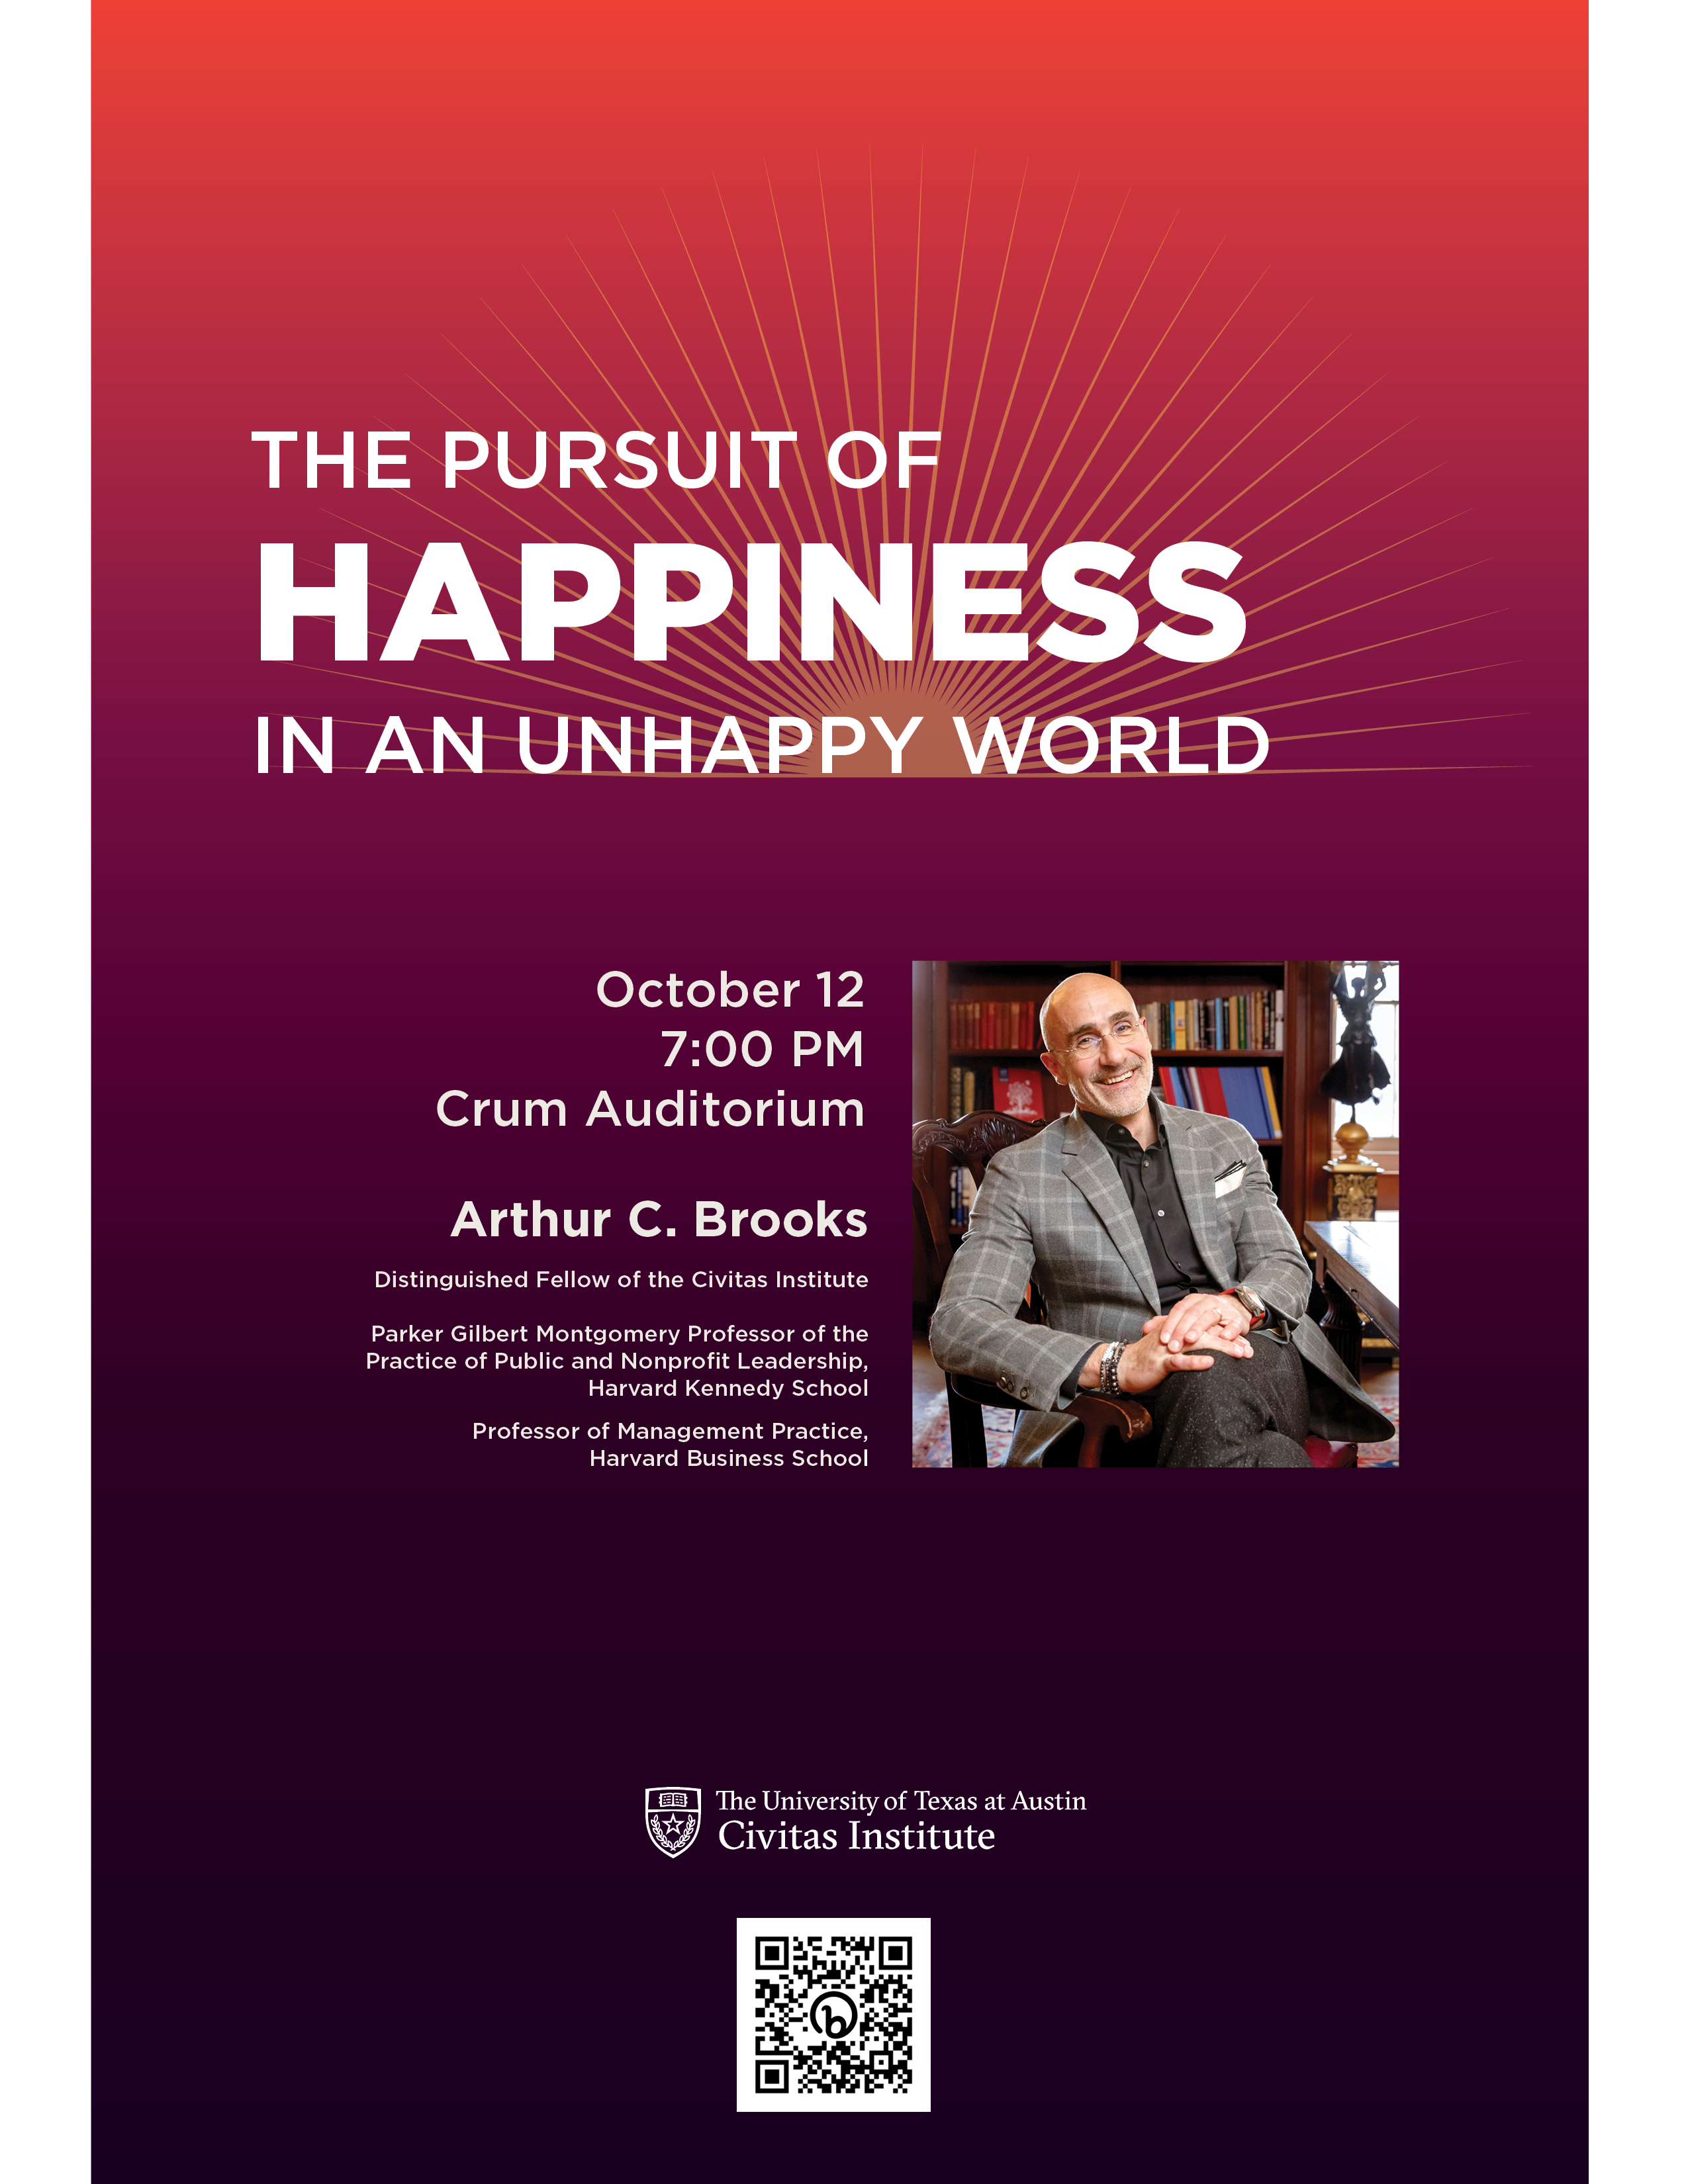 The Pursuit of Happiness in an Unhappy World October 12 7:00 PM Crum Auditorium Arthur C. Brooks Distinguished Fellow of the Civitas Institute Parker Gilbert Montgomery Professor of the Practice of Public and Nonprofit Leadership, Harvard Kennedy School Professor of Management Practice, Harvard Business School